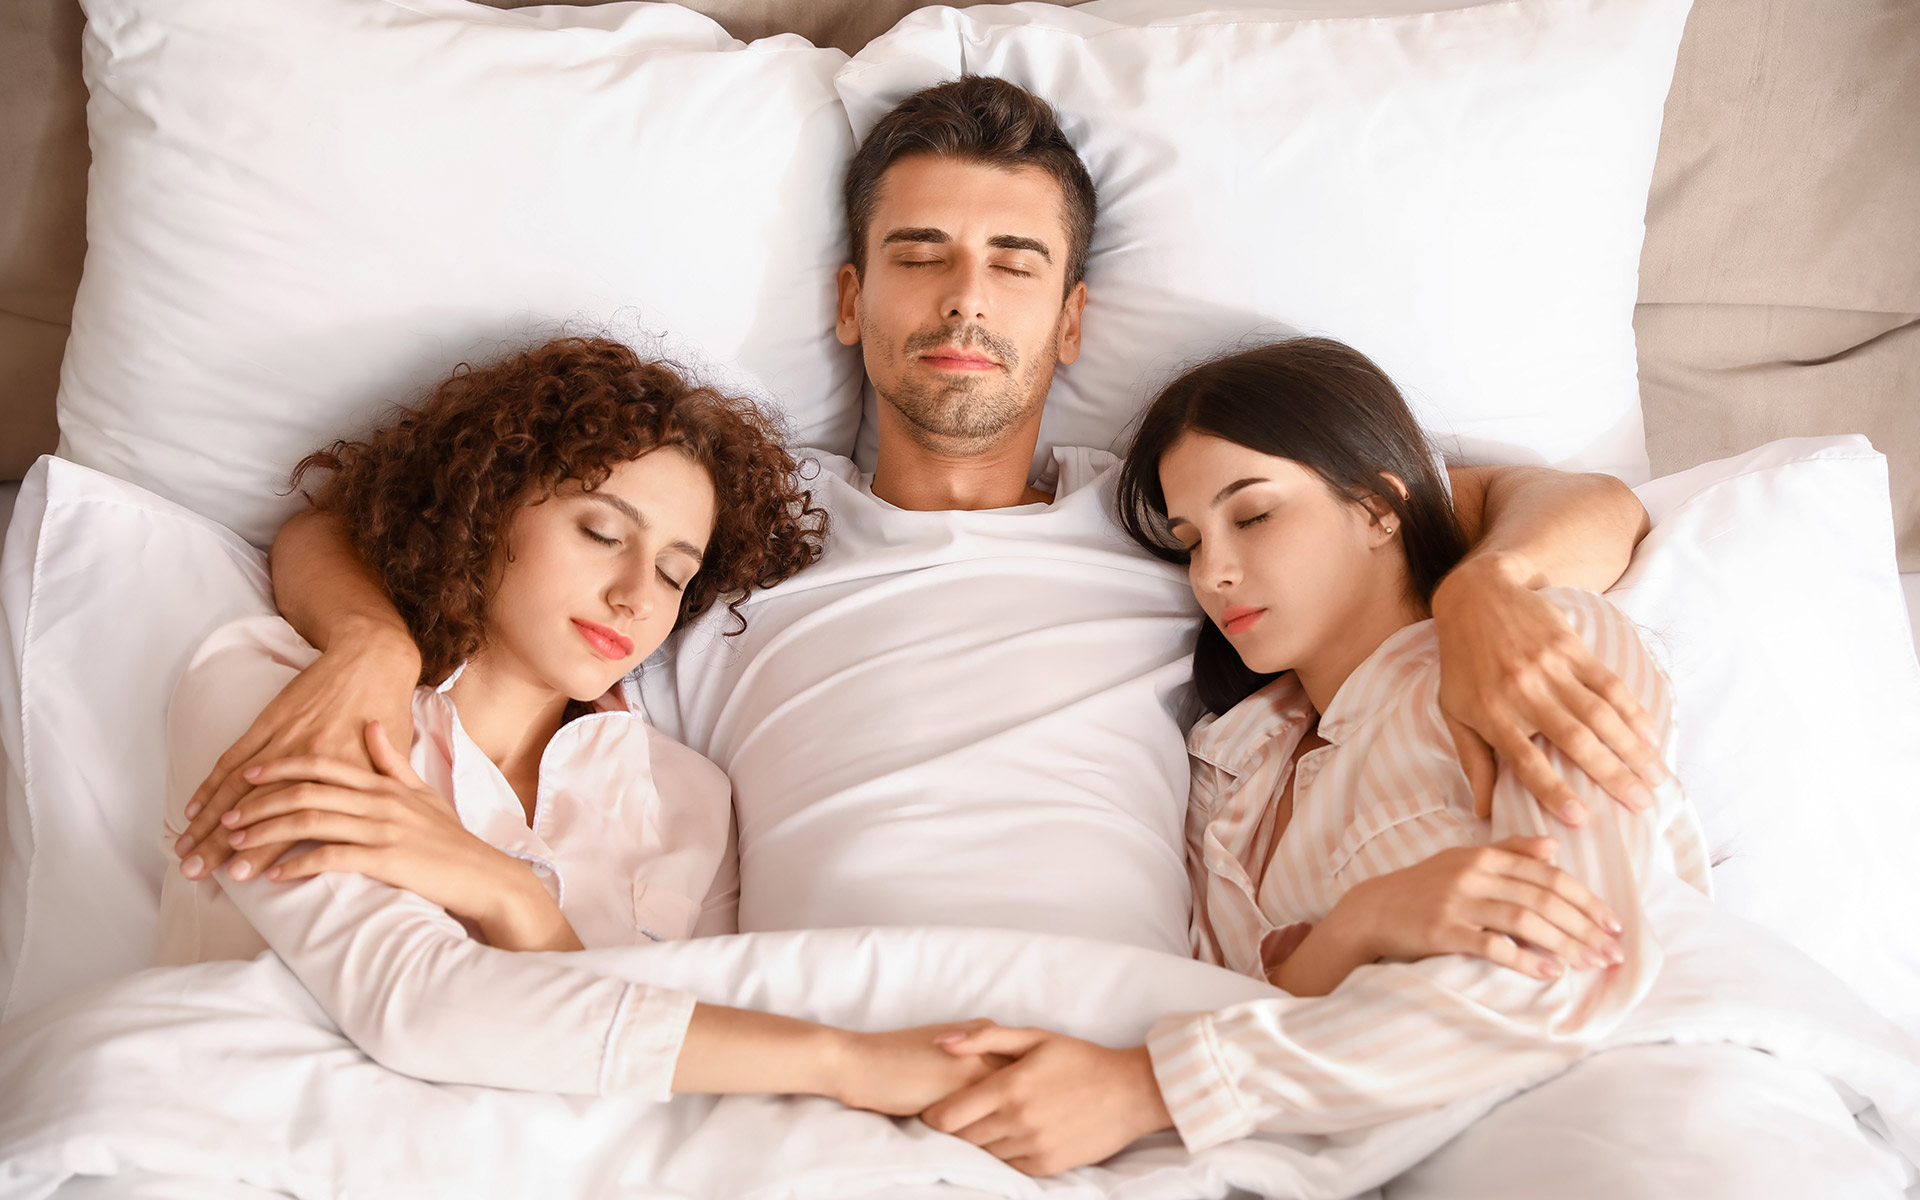 Sleeping man lying in bed hugging two sleeping women. His arms are around each woman and they are holding each other's hand.